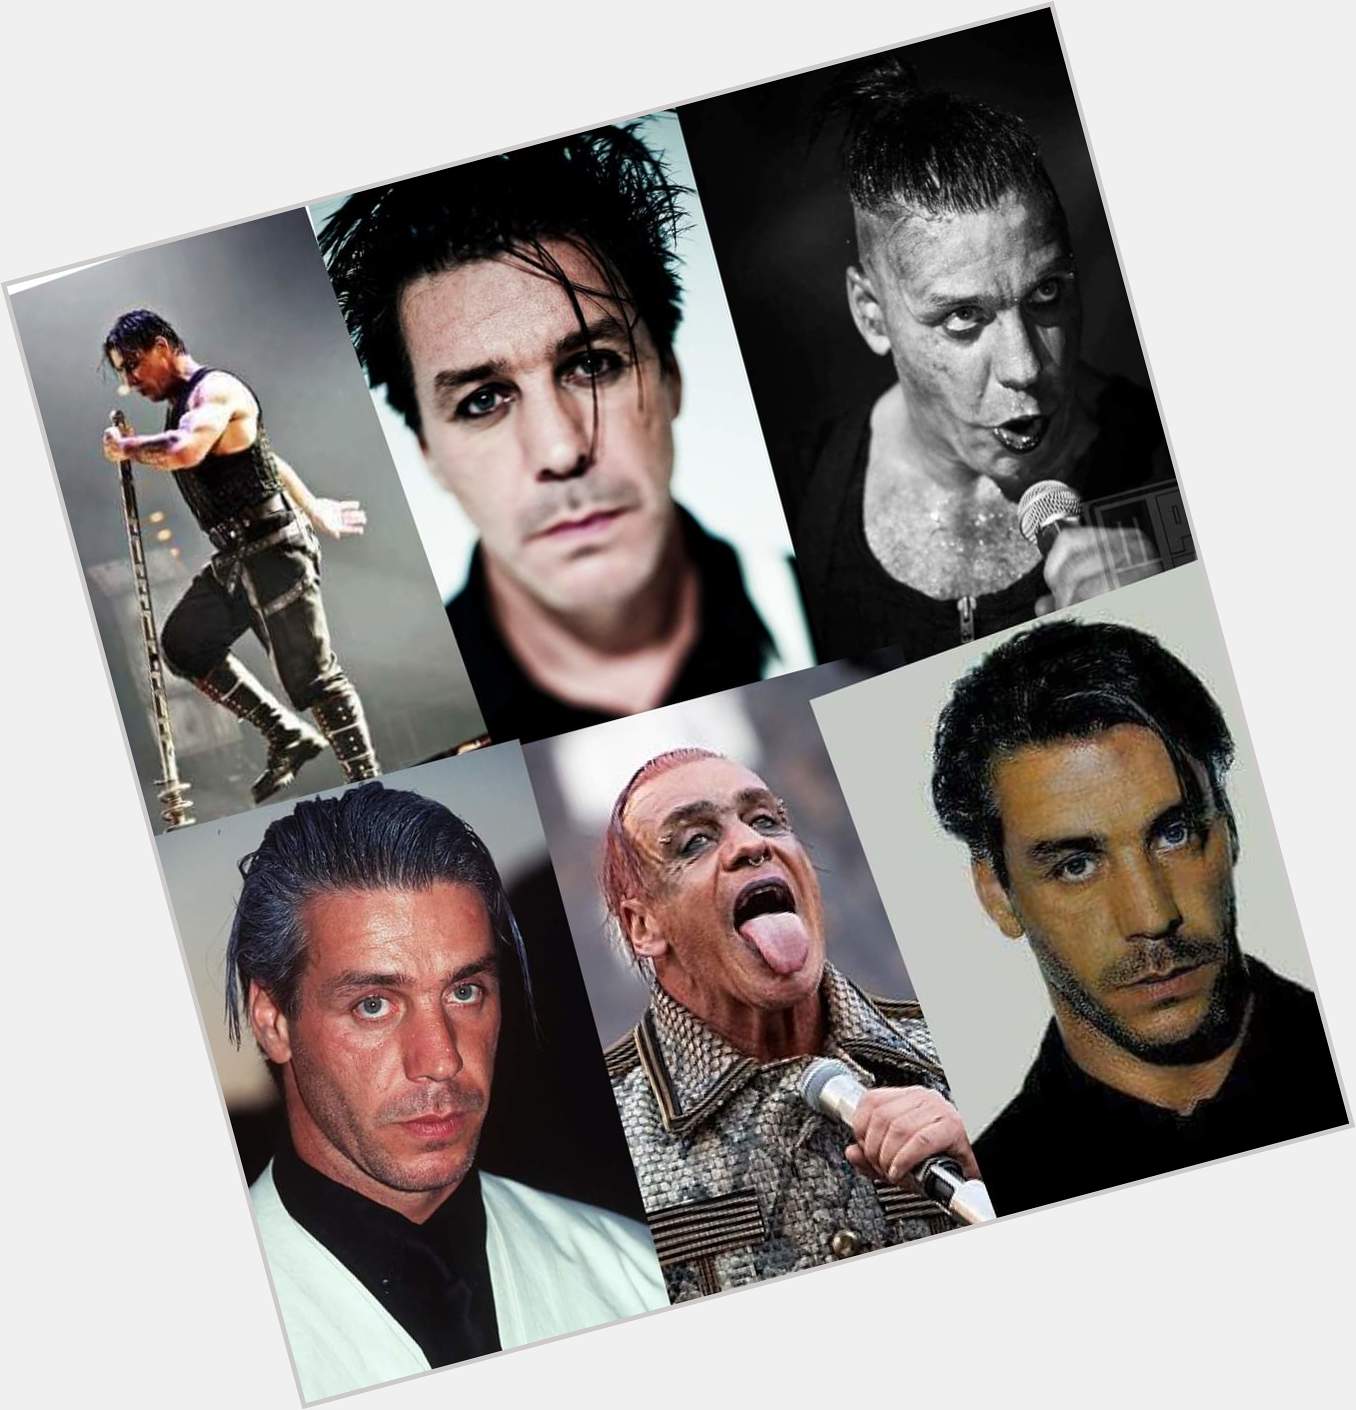 Happy Birthday Till Lindemann.  New Age 60. Singer from the Band  Rammstein 